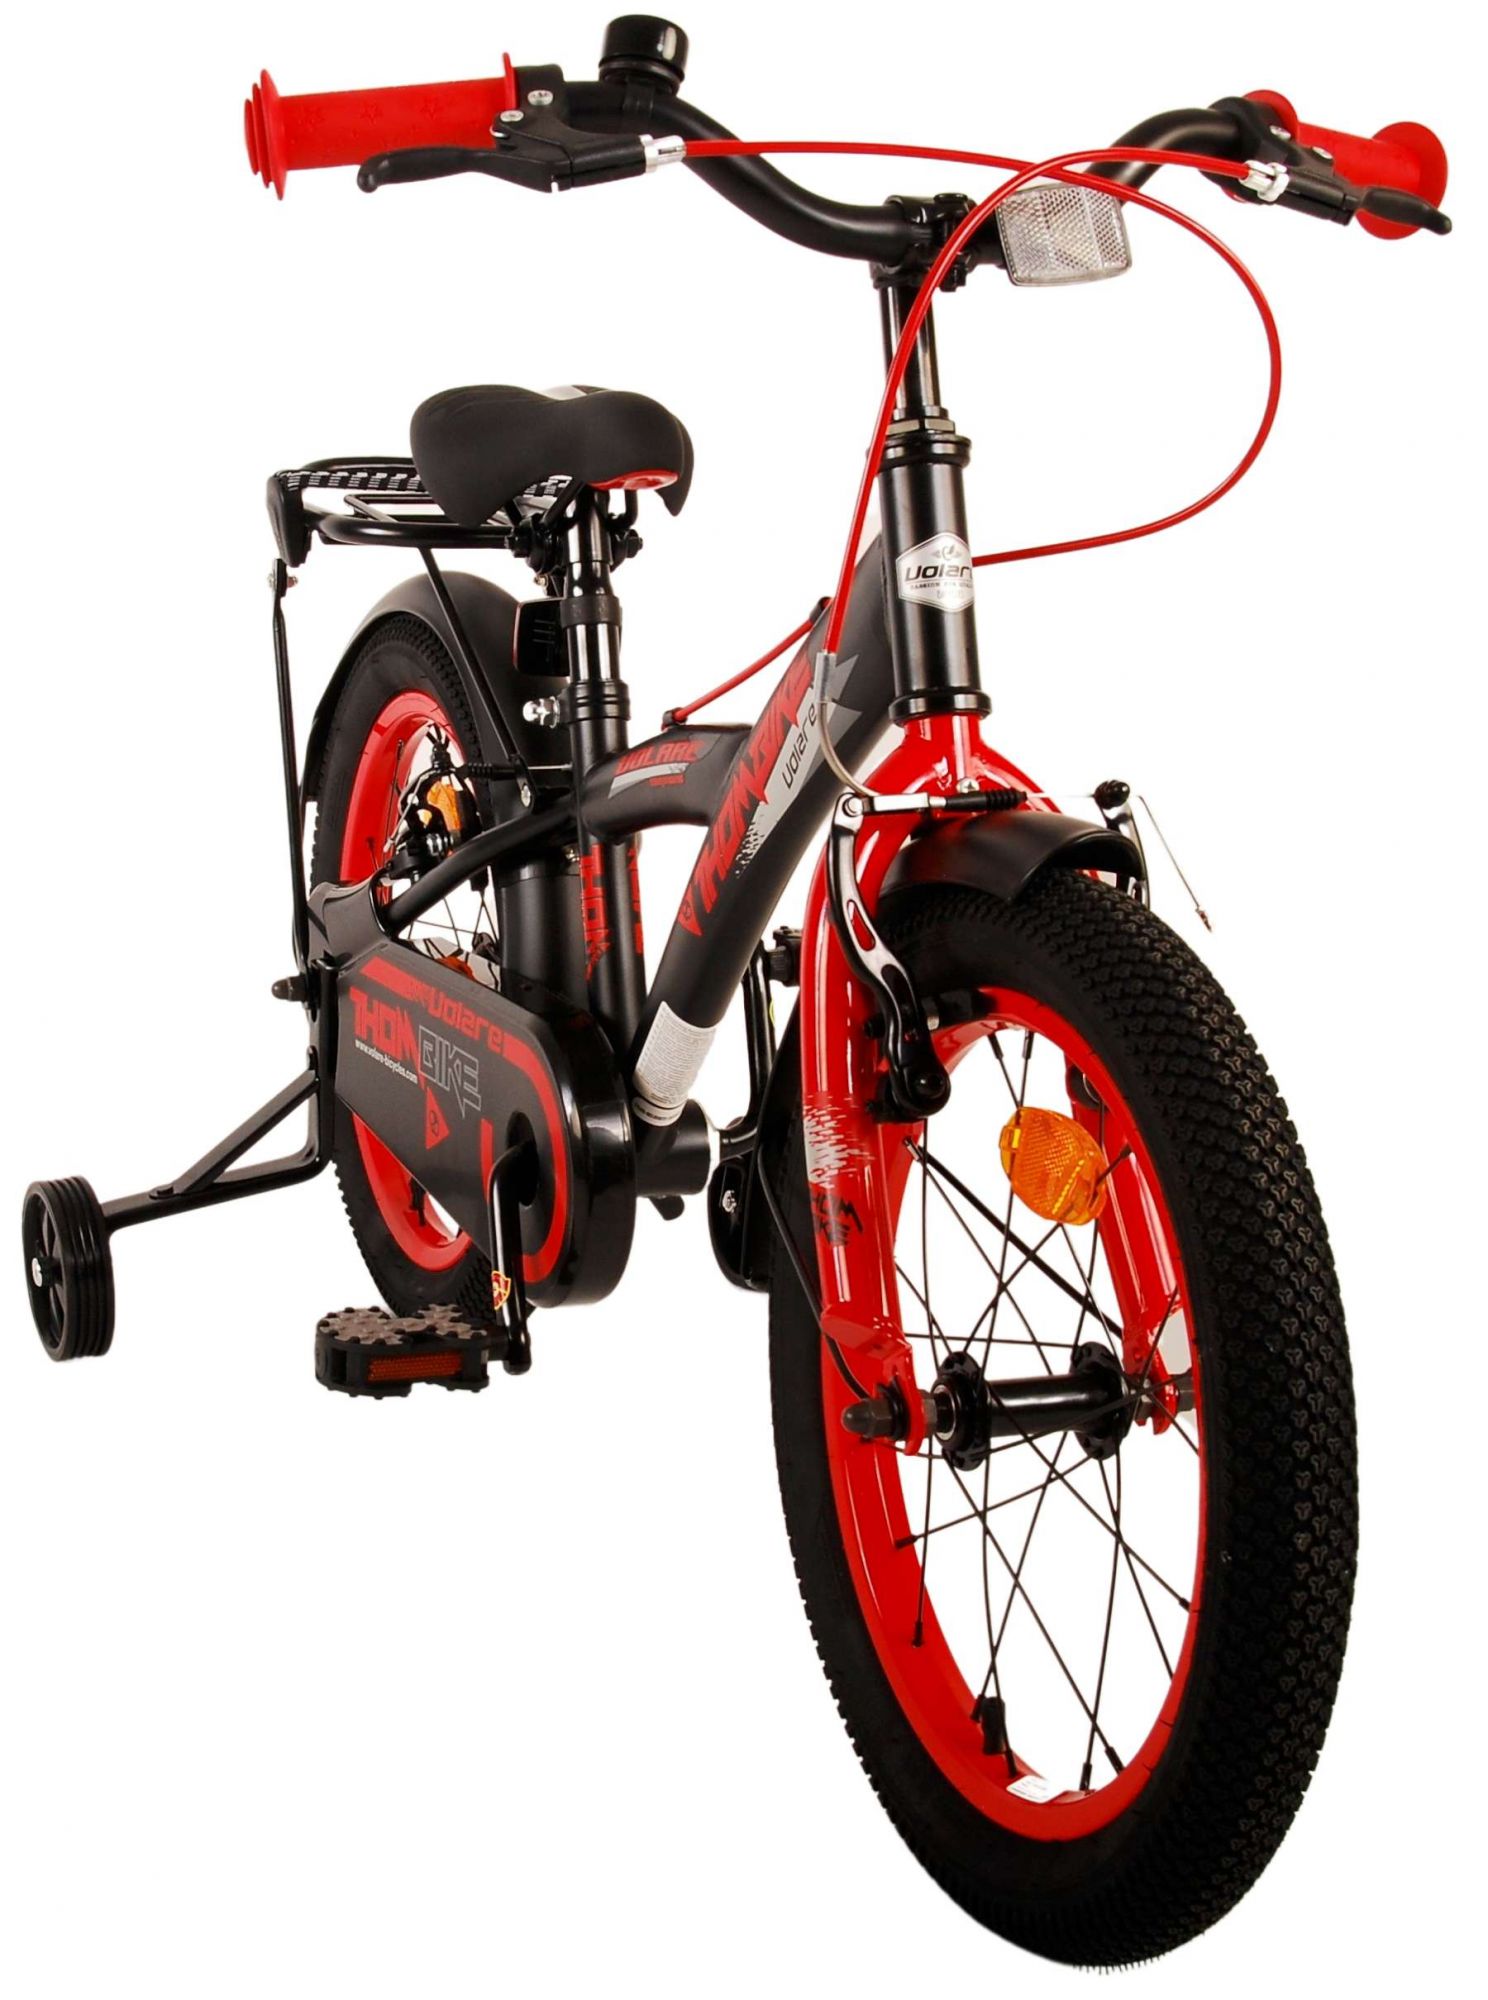 Thombike_16_inch_Rood_-_9-W1800